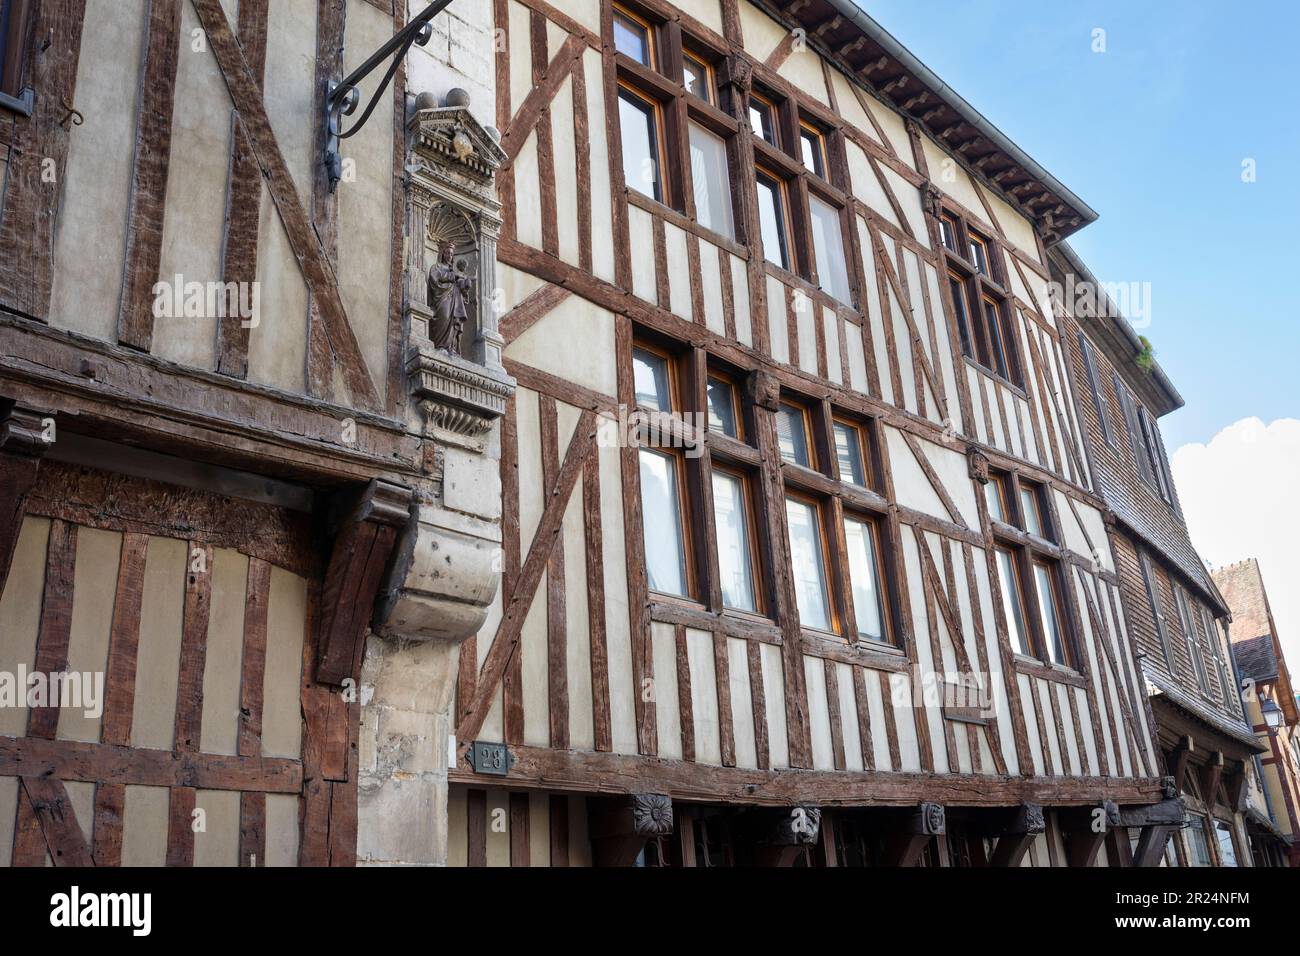 Half-timbered house with a shrine with Mary and Jesus in the city center of Troyes, France Stock Photo